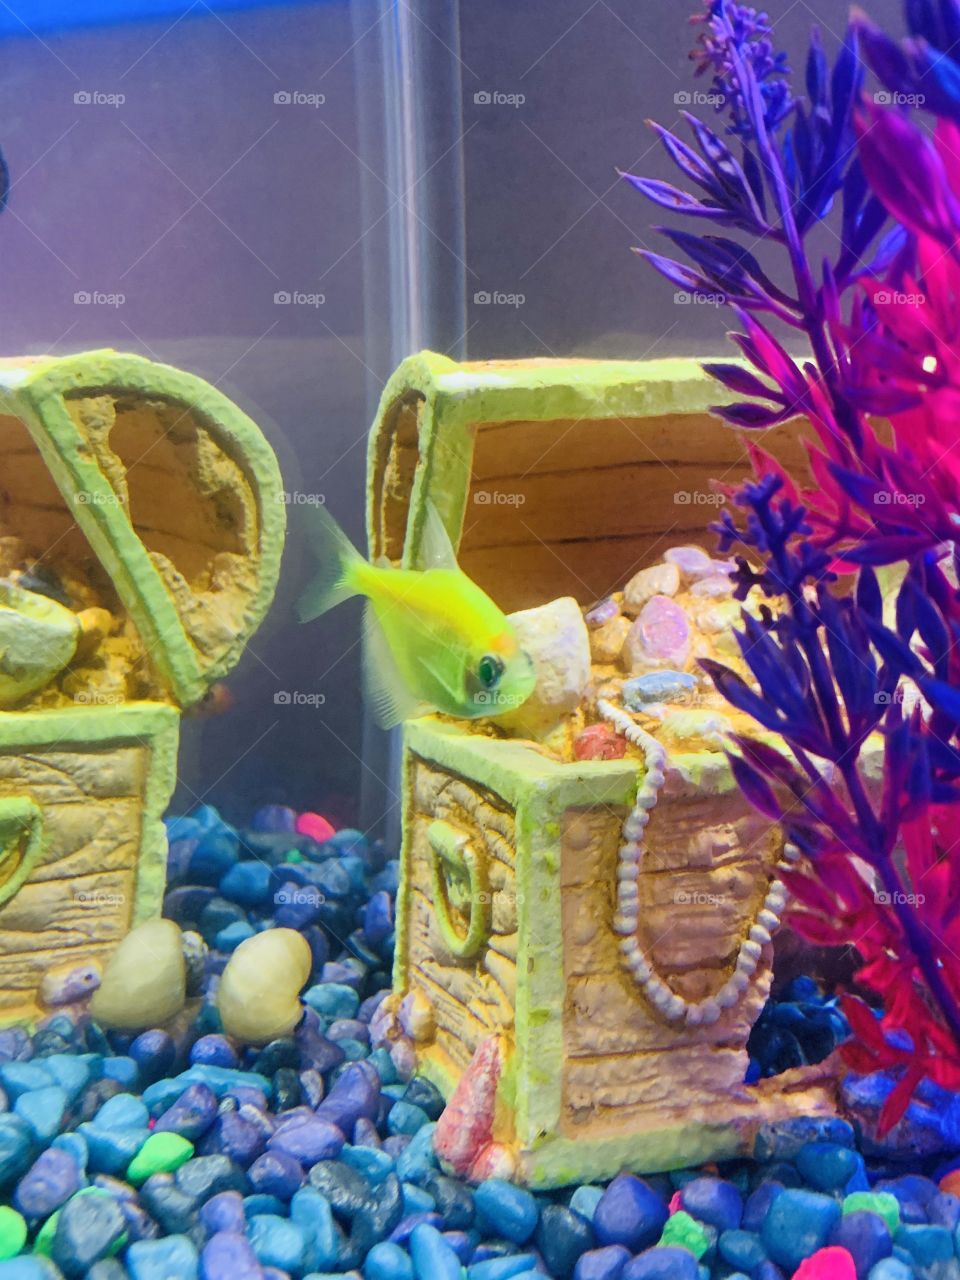 Neon tetra fish and a snail 